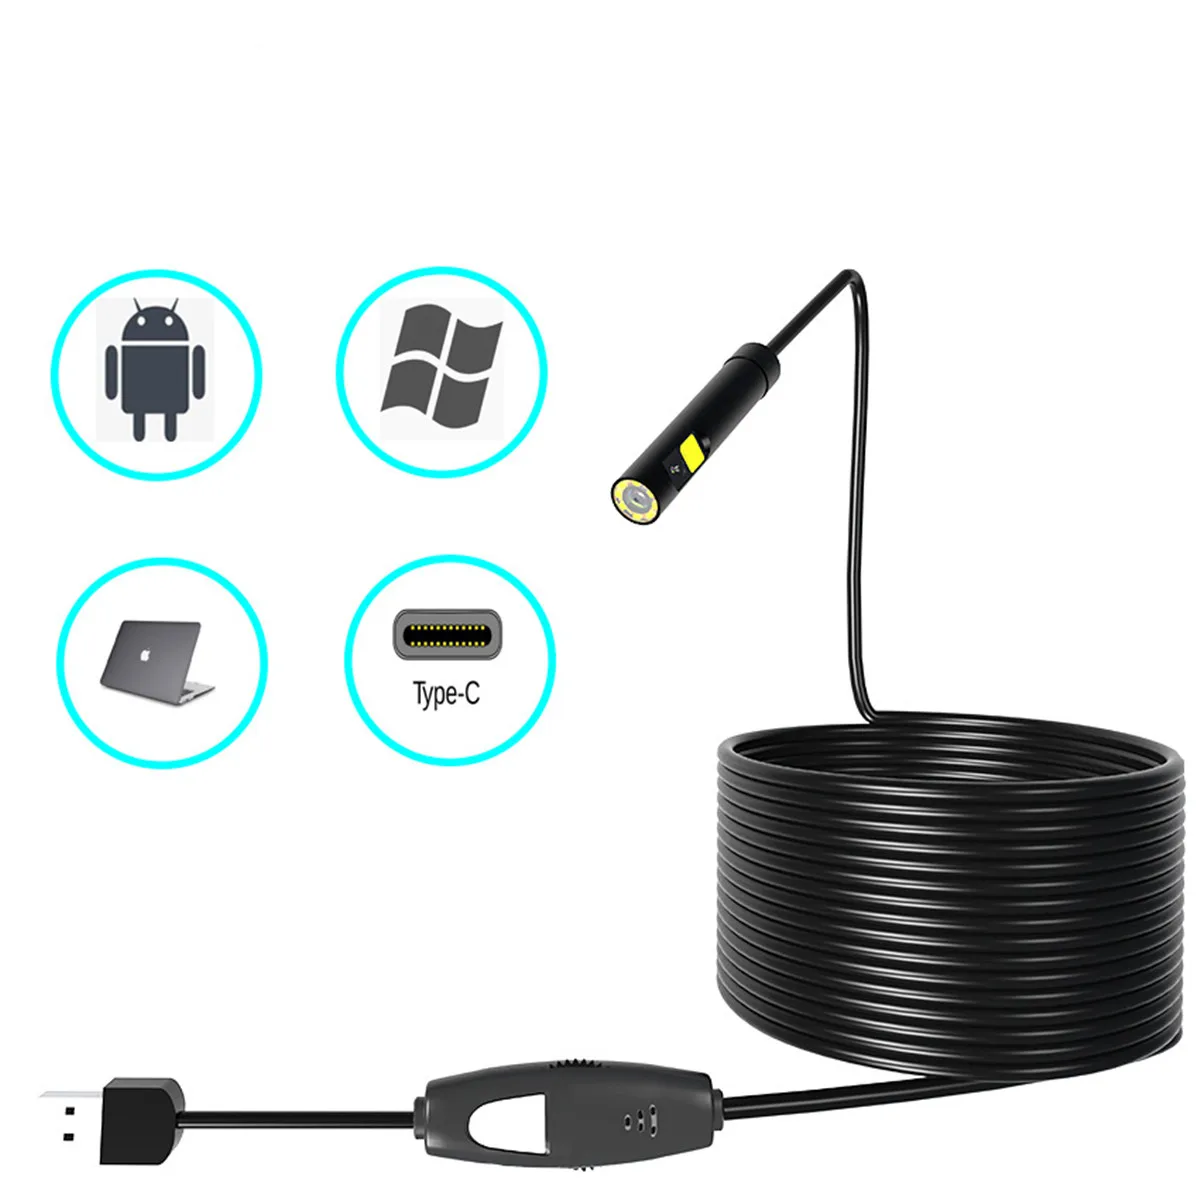 2MP 8MM 3in1 USB Dual Lens Endoscope Camera For Android&Computer CMOS Borescope Inspection  Digital Microscope Otoscope 4 3 inch 2mp 1080p with hdmi digital microscope handheld endoscope hd inspection otoscope cmos borescope camera